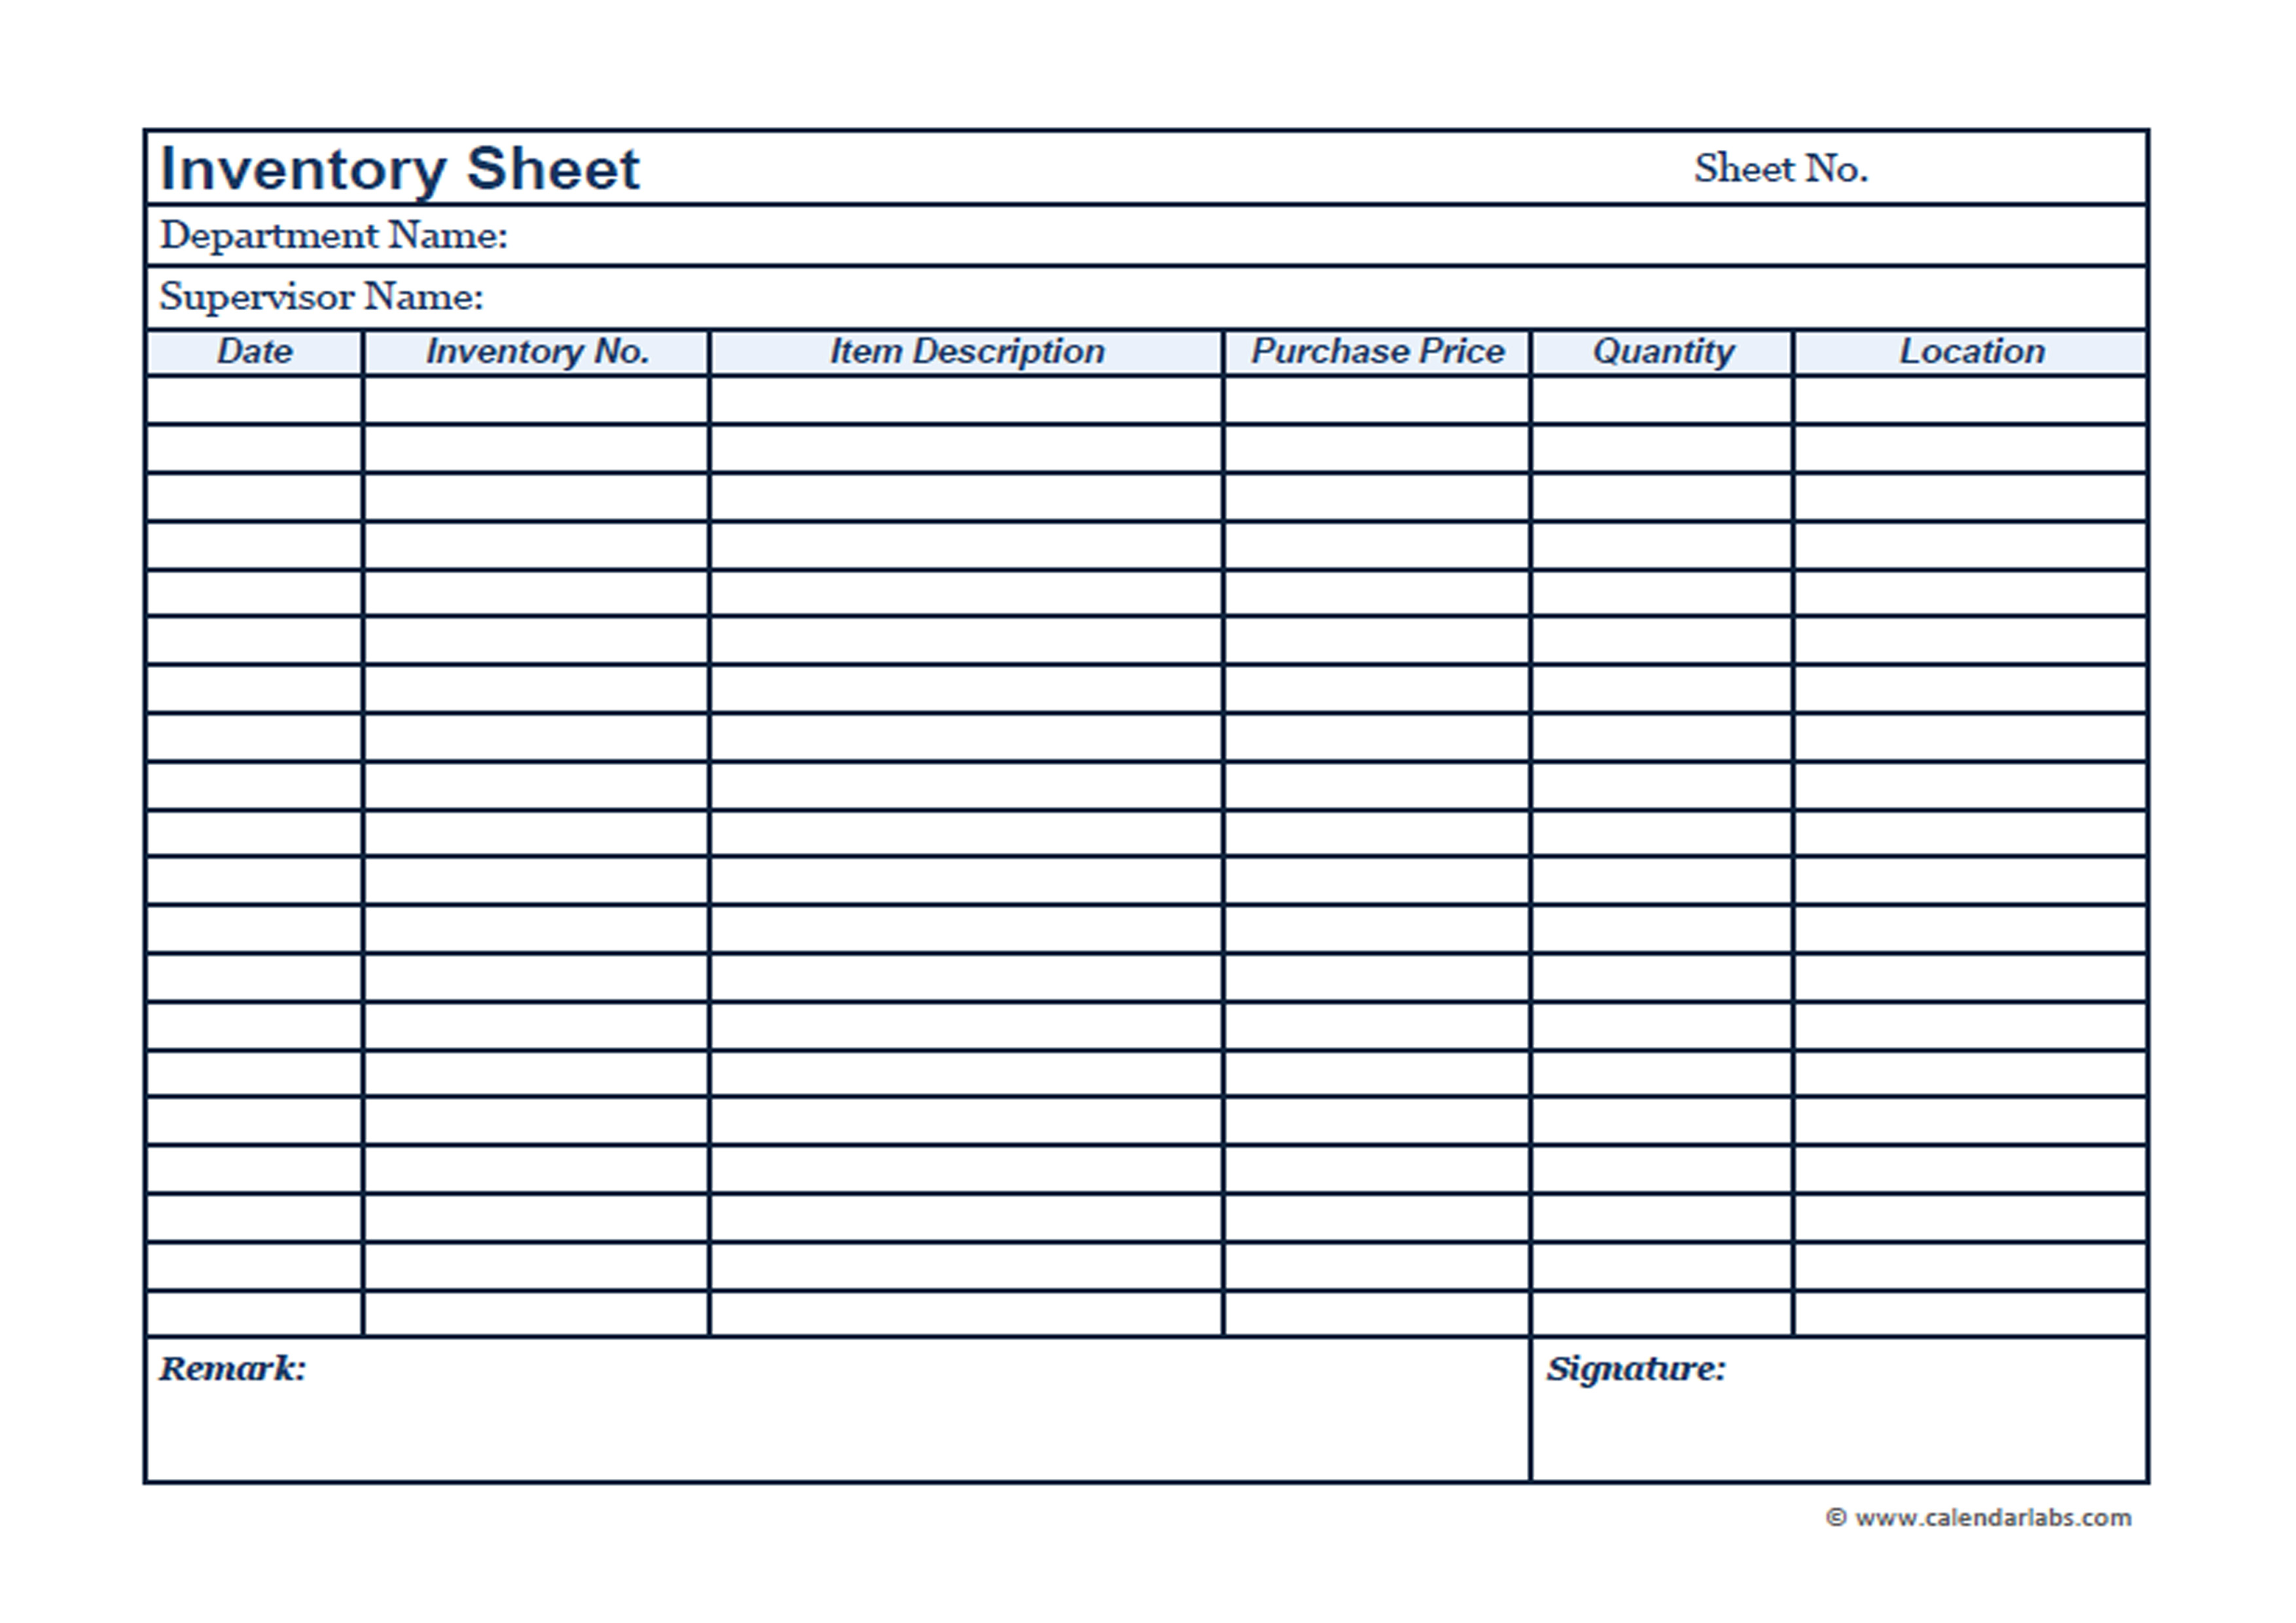 Inventory List Template In 2020 Templates Printable Free List Vrogue